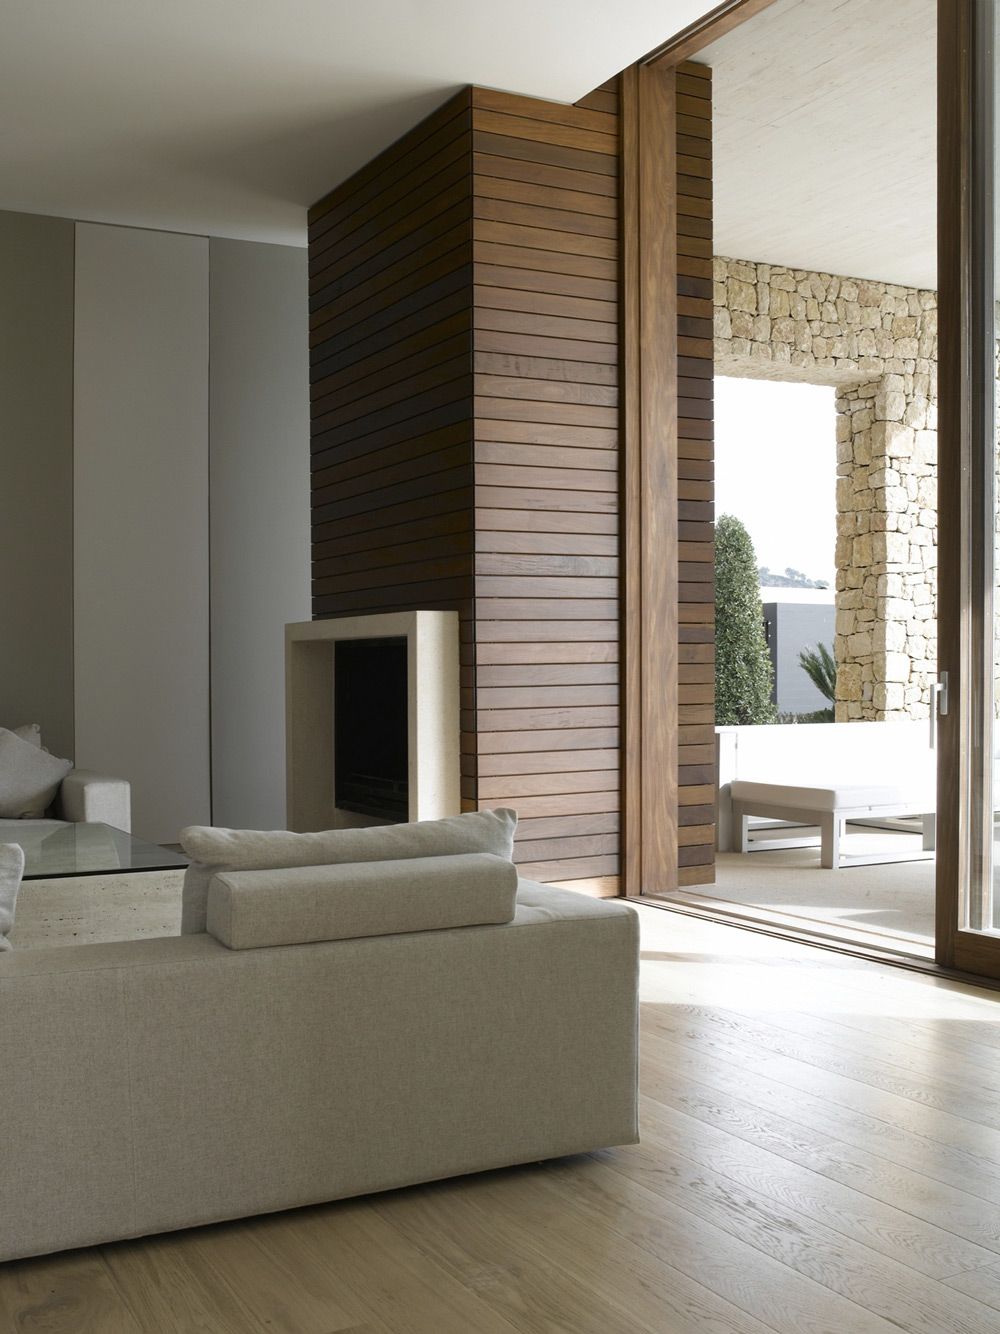 Living Space, Contemporary Fireplace, Contemporary Home in Monasterios, Spain